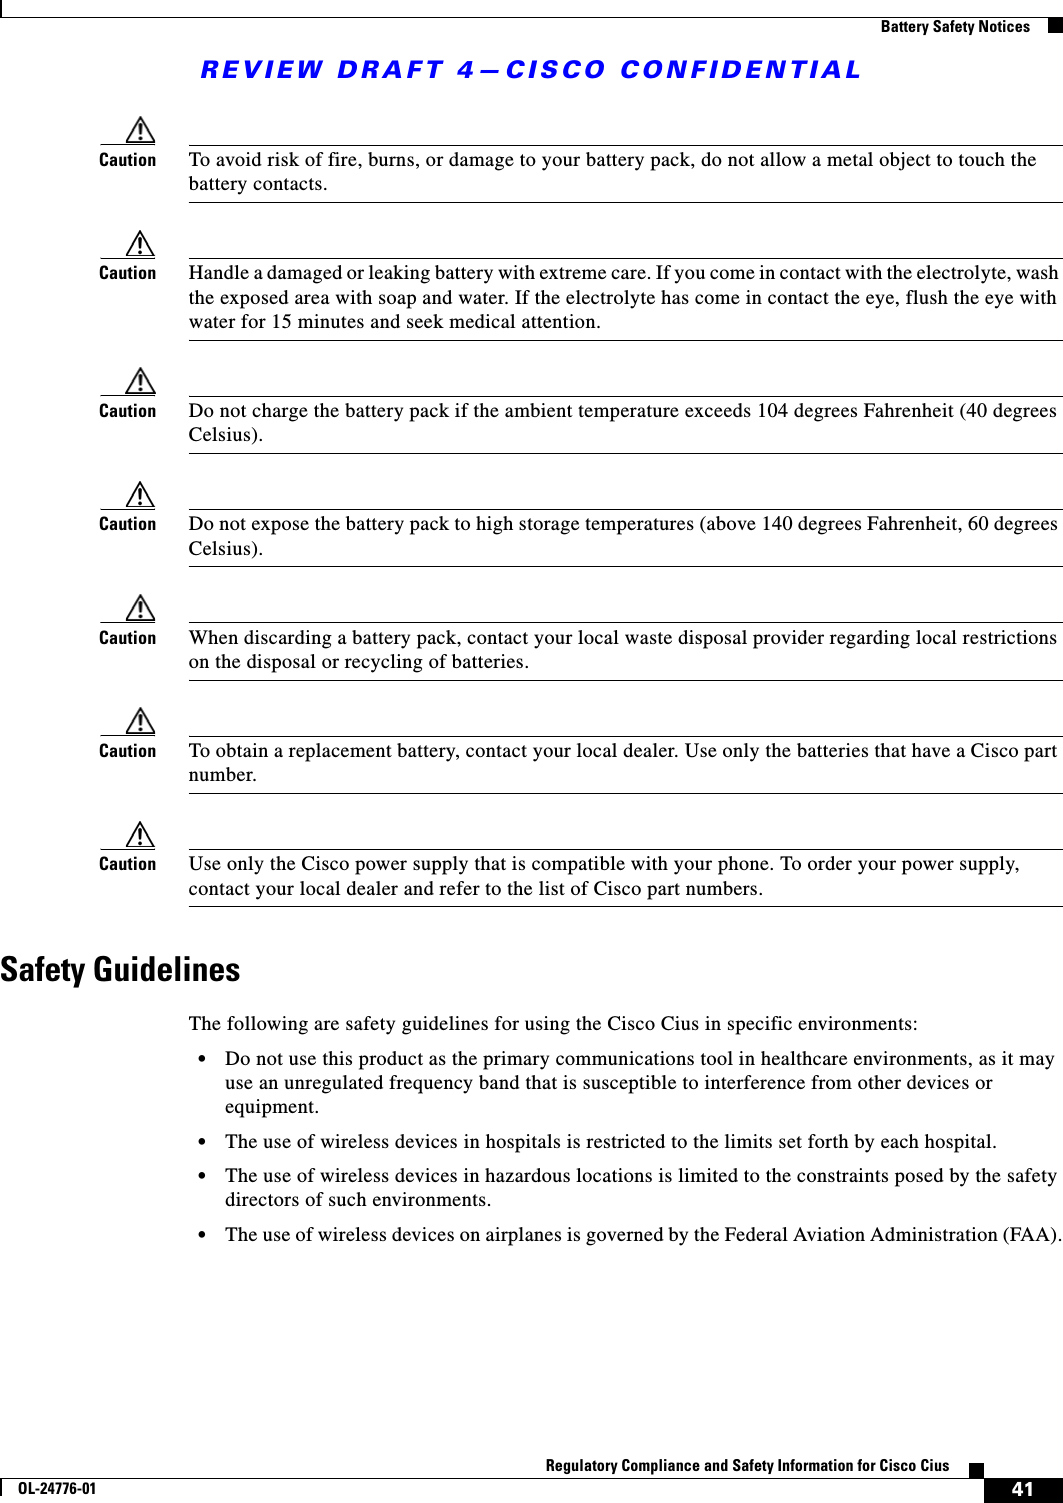 REVIEW DRAFT 4—CISCO CONFIDENTIAL41Regulatory Compliance and Safety Information for Cisco CiusOL-24776-01  Battery Safety NoticesCaution To avoid risk of fire, burns, or damage to your battery pack, do not allow a metal object to touch the battery contacts.Caution Handle a damaged or leaking battery with extreme care. If you come in contact with the electrolyte, wash the exposed area with soap and water. If the electrolyte has come in contact the eye, flush the eye with water for 15 minutes and seek medical attention.Caution Do not charge the battery pack if the ambient temperature exceeds 104 degrees Fahrenheit (40 degrees Celsius).Caution Do not expose the battery pack to high storage temperatures (above 140 degrees Fahrenheit, 60 degrees Celsius).Caution When discarding a battery pack, contact your local waste disposal provider regarding local restrictions on the disposal or recycling of batteries.Caution To obtain a replacement battery, contact your local dealer. Use only the batteries that have a Cisco part number.Caution Use only the Cisco power supply that is compatible with your phone. To order your power supply, contact your local dealer and refer to the list of Cisco part numbers.Safety GuidelinesThe following are safety guidelines for using the Cisco Cius in specific environments: • Do not use this product as the primary communications tool in healthcare environments, as it may use an unregulated frequency band that is susceptible to interference from other devices or equipment. • The use of wireless devices in hospitals is restricted to the limits set forth by each hospital. • The use of wireless devices in hazardous locations is limited to the constraints posed by the safety directors of such environments. • The use of wireless devices on airplanes is governed by the Federal Aviation Administration (FAA).